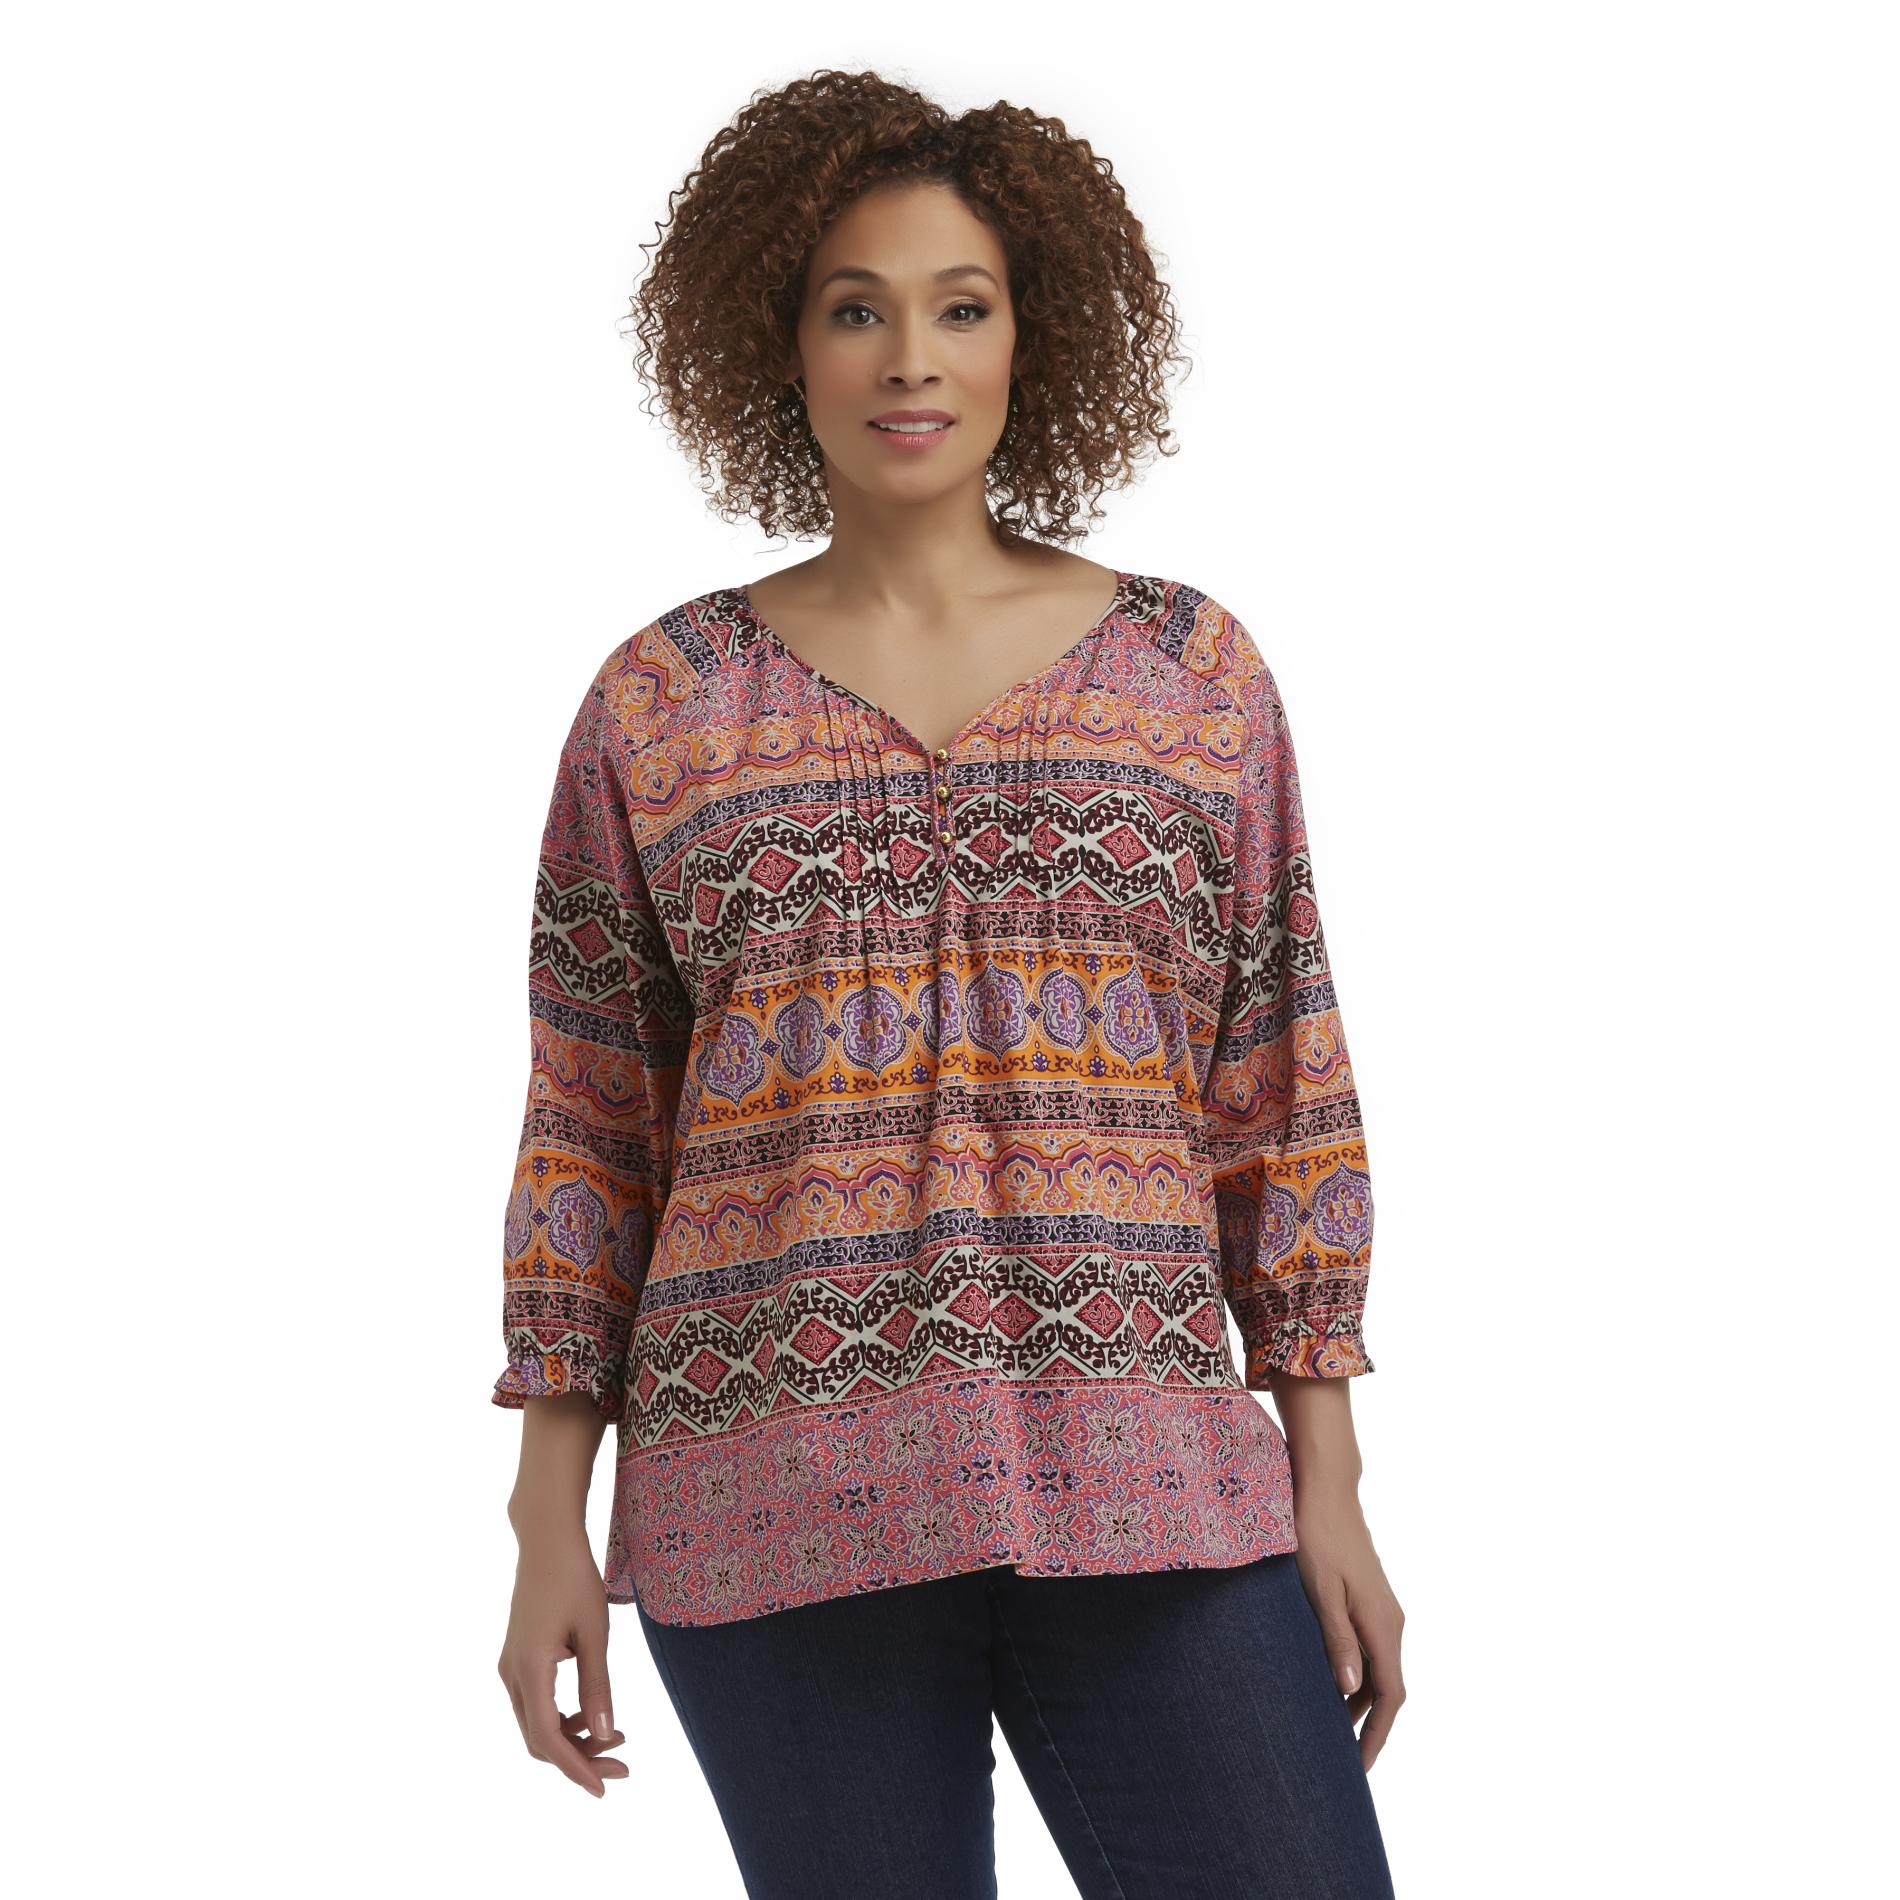 Basic Editions Women's Plus Pintucked Blouse - Eastern Inspired